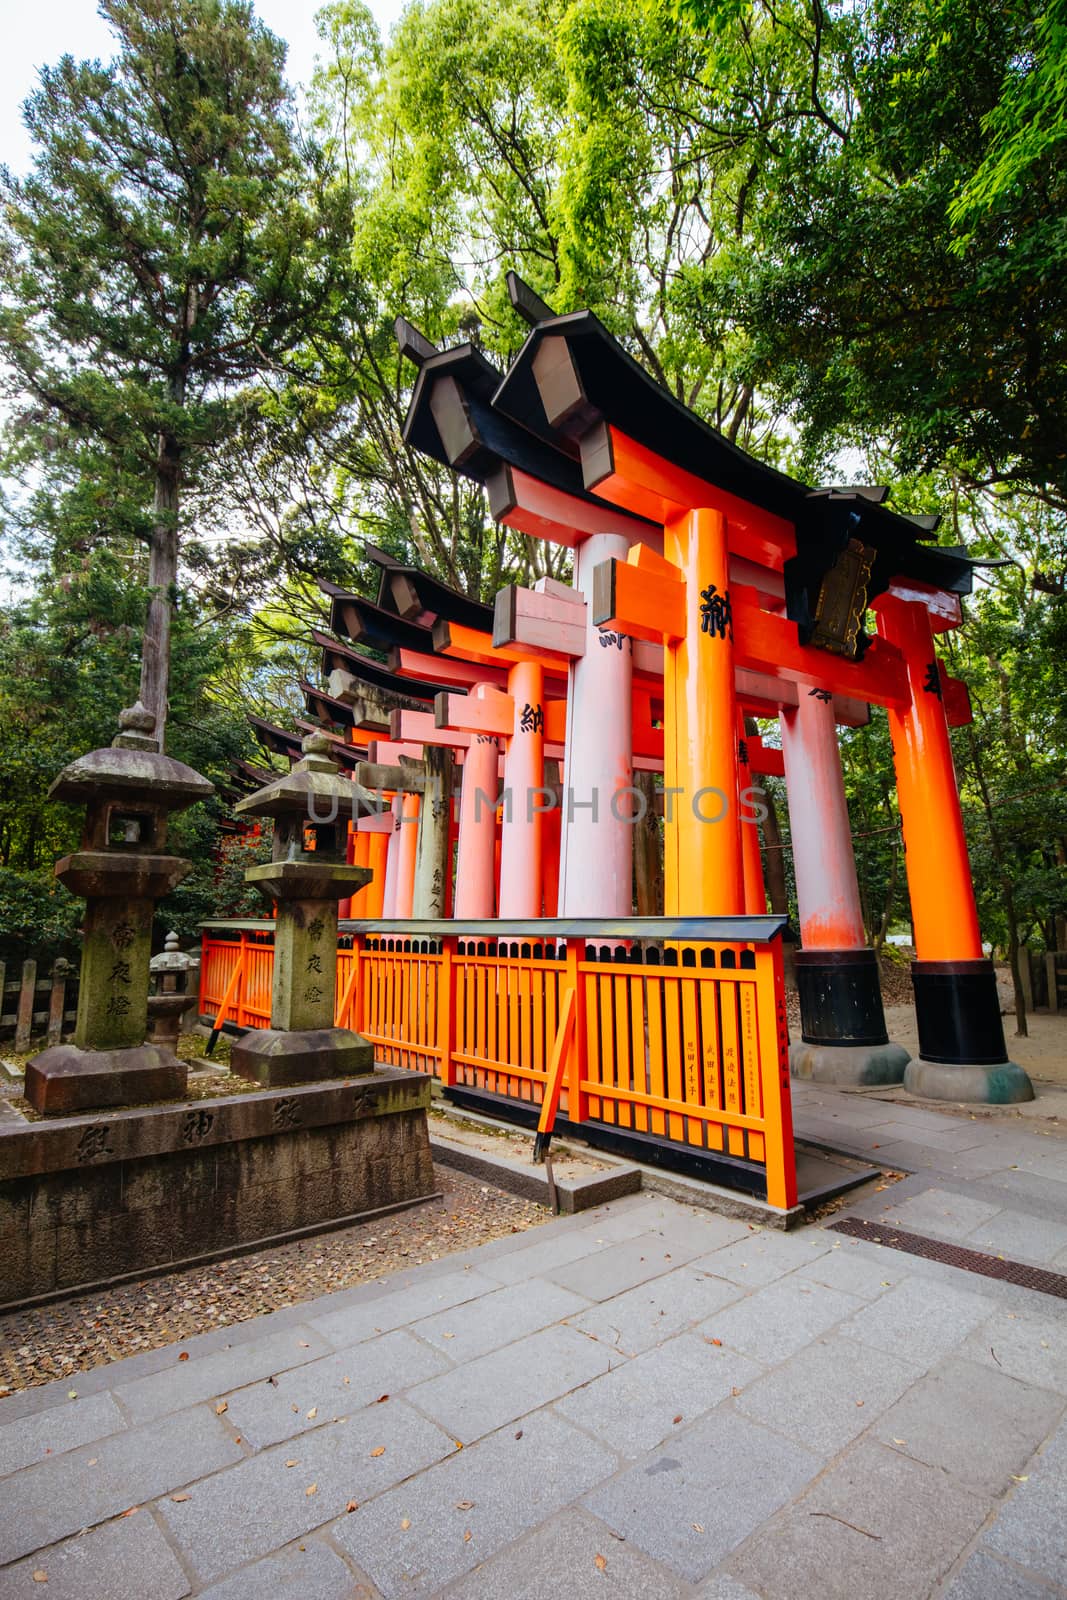 Front entrance at Fushimi Inari Shrine in Kyoto, Japan. One of the largest tourist attractions in Japan